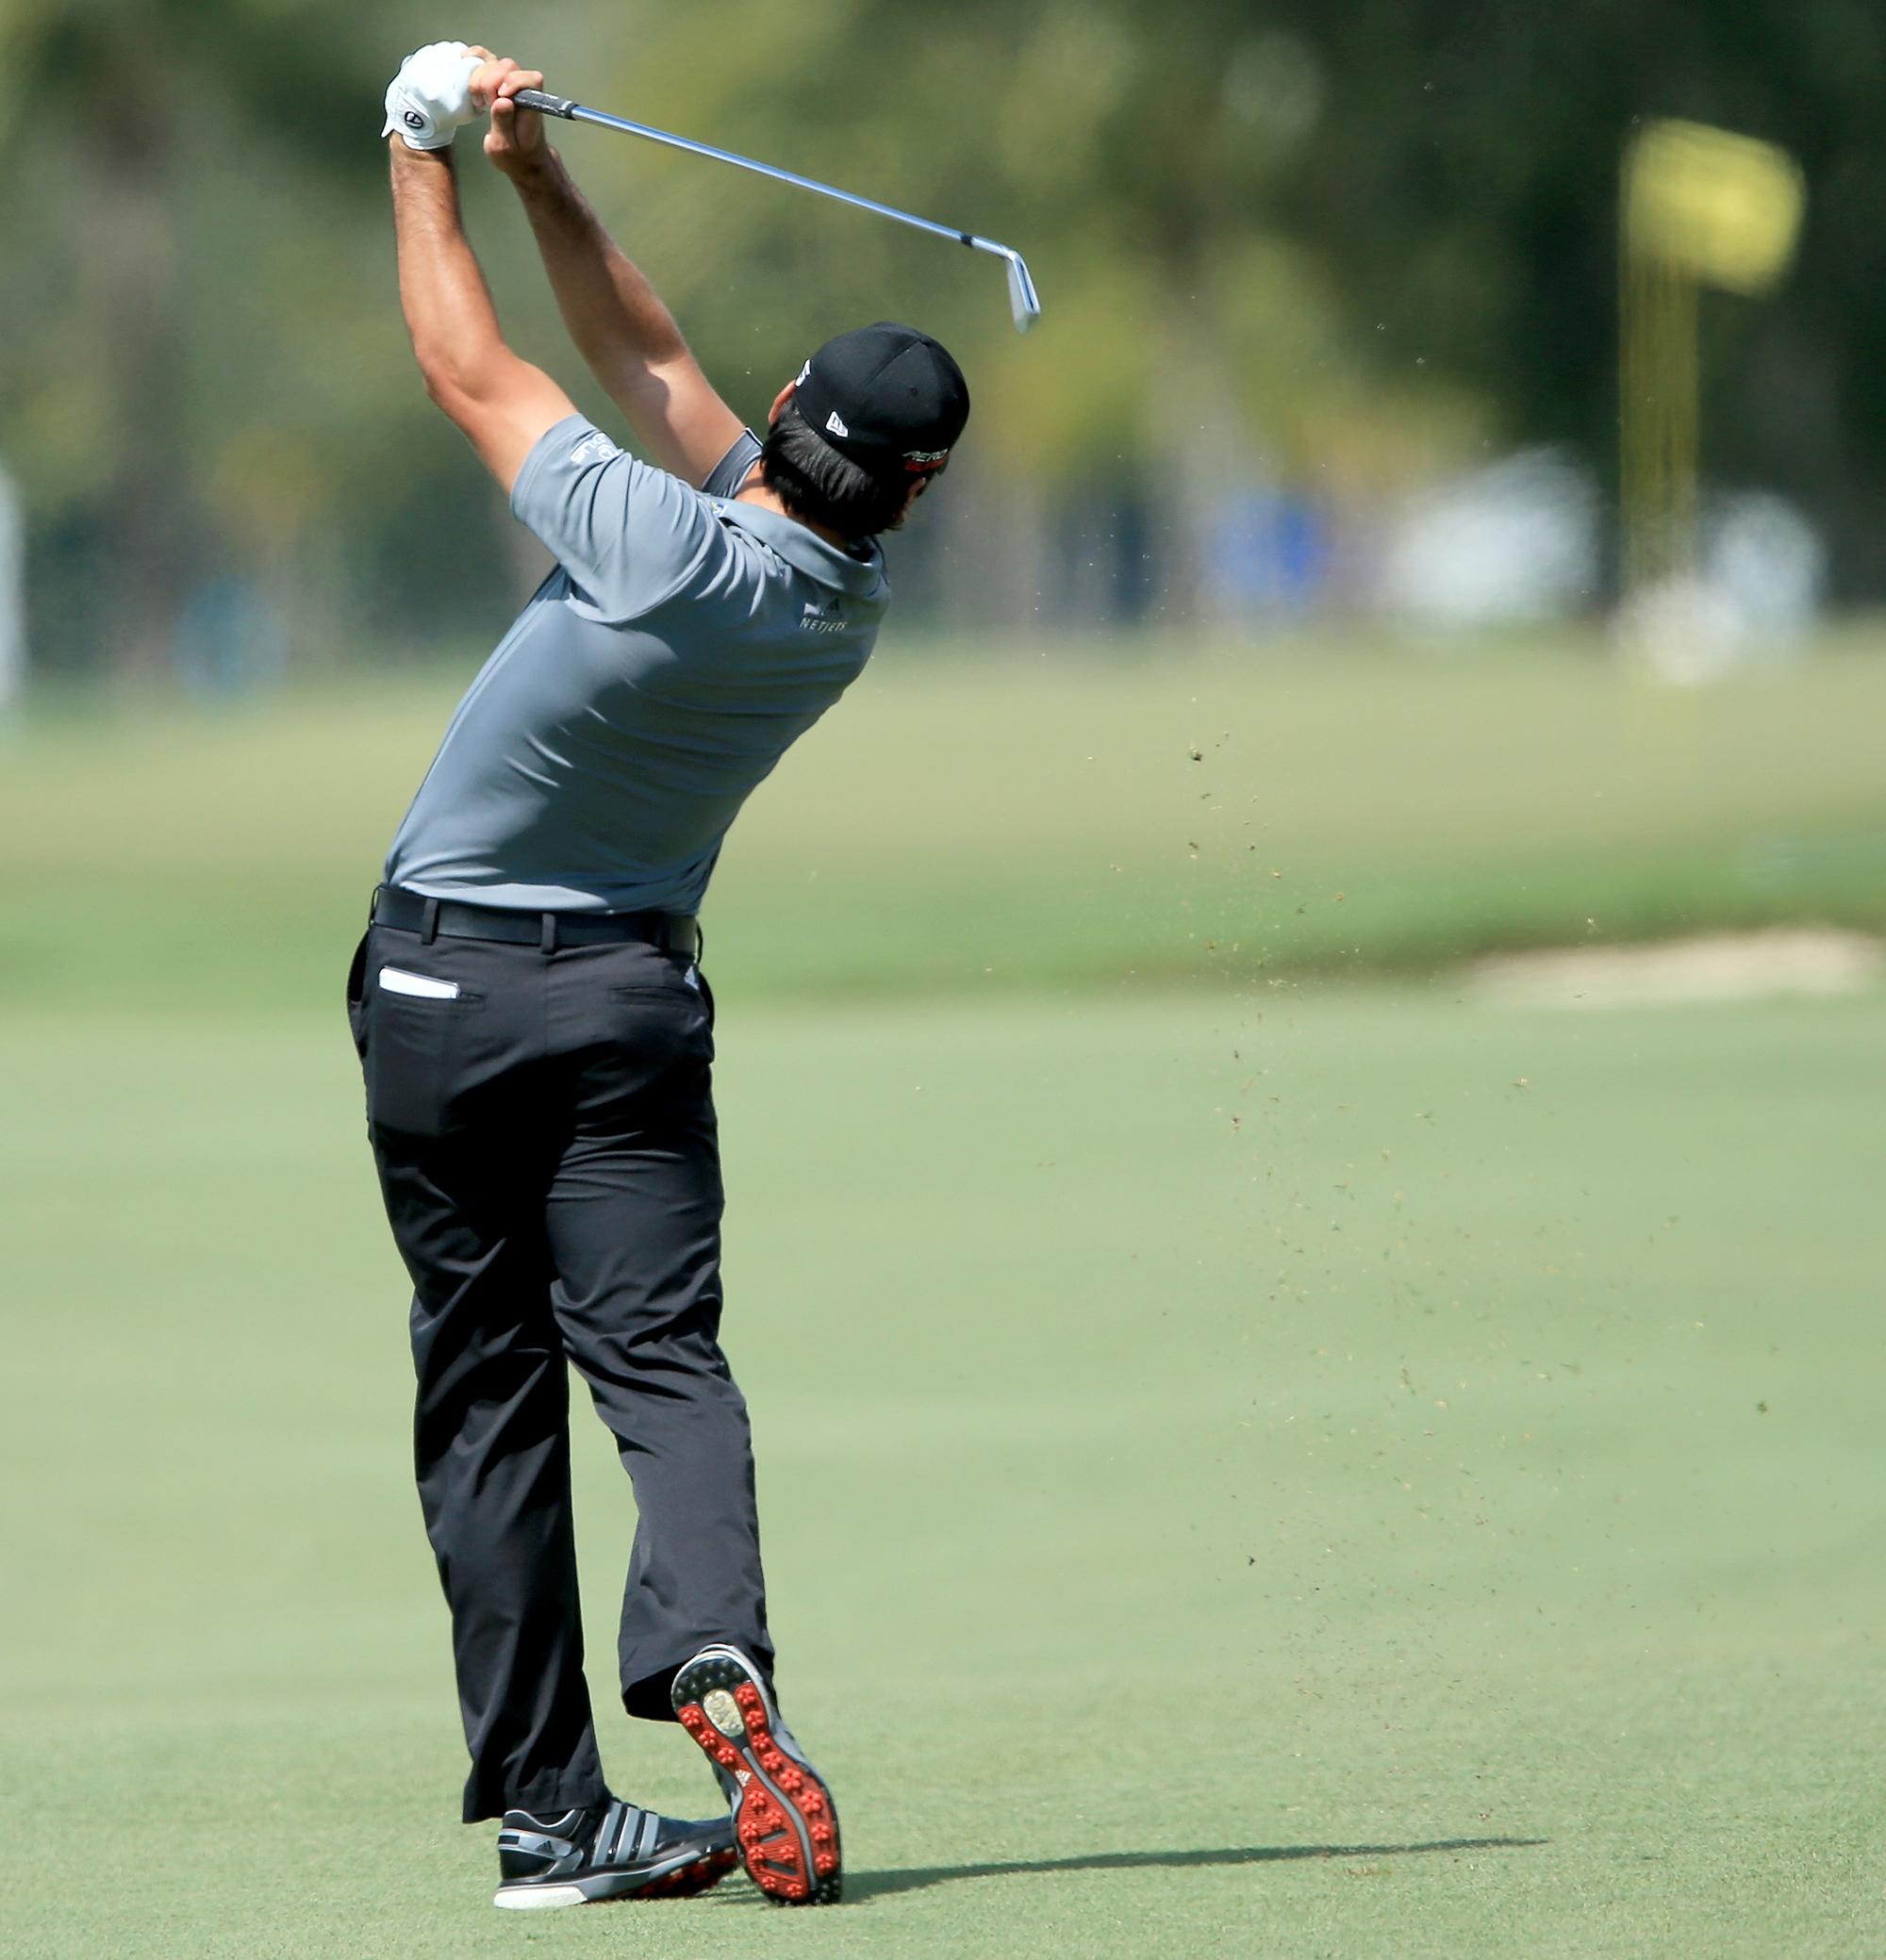 Jason Day is a big fan of the new "adipower boost" shoes